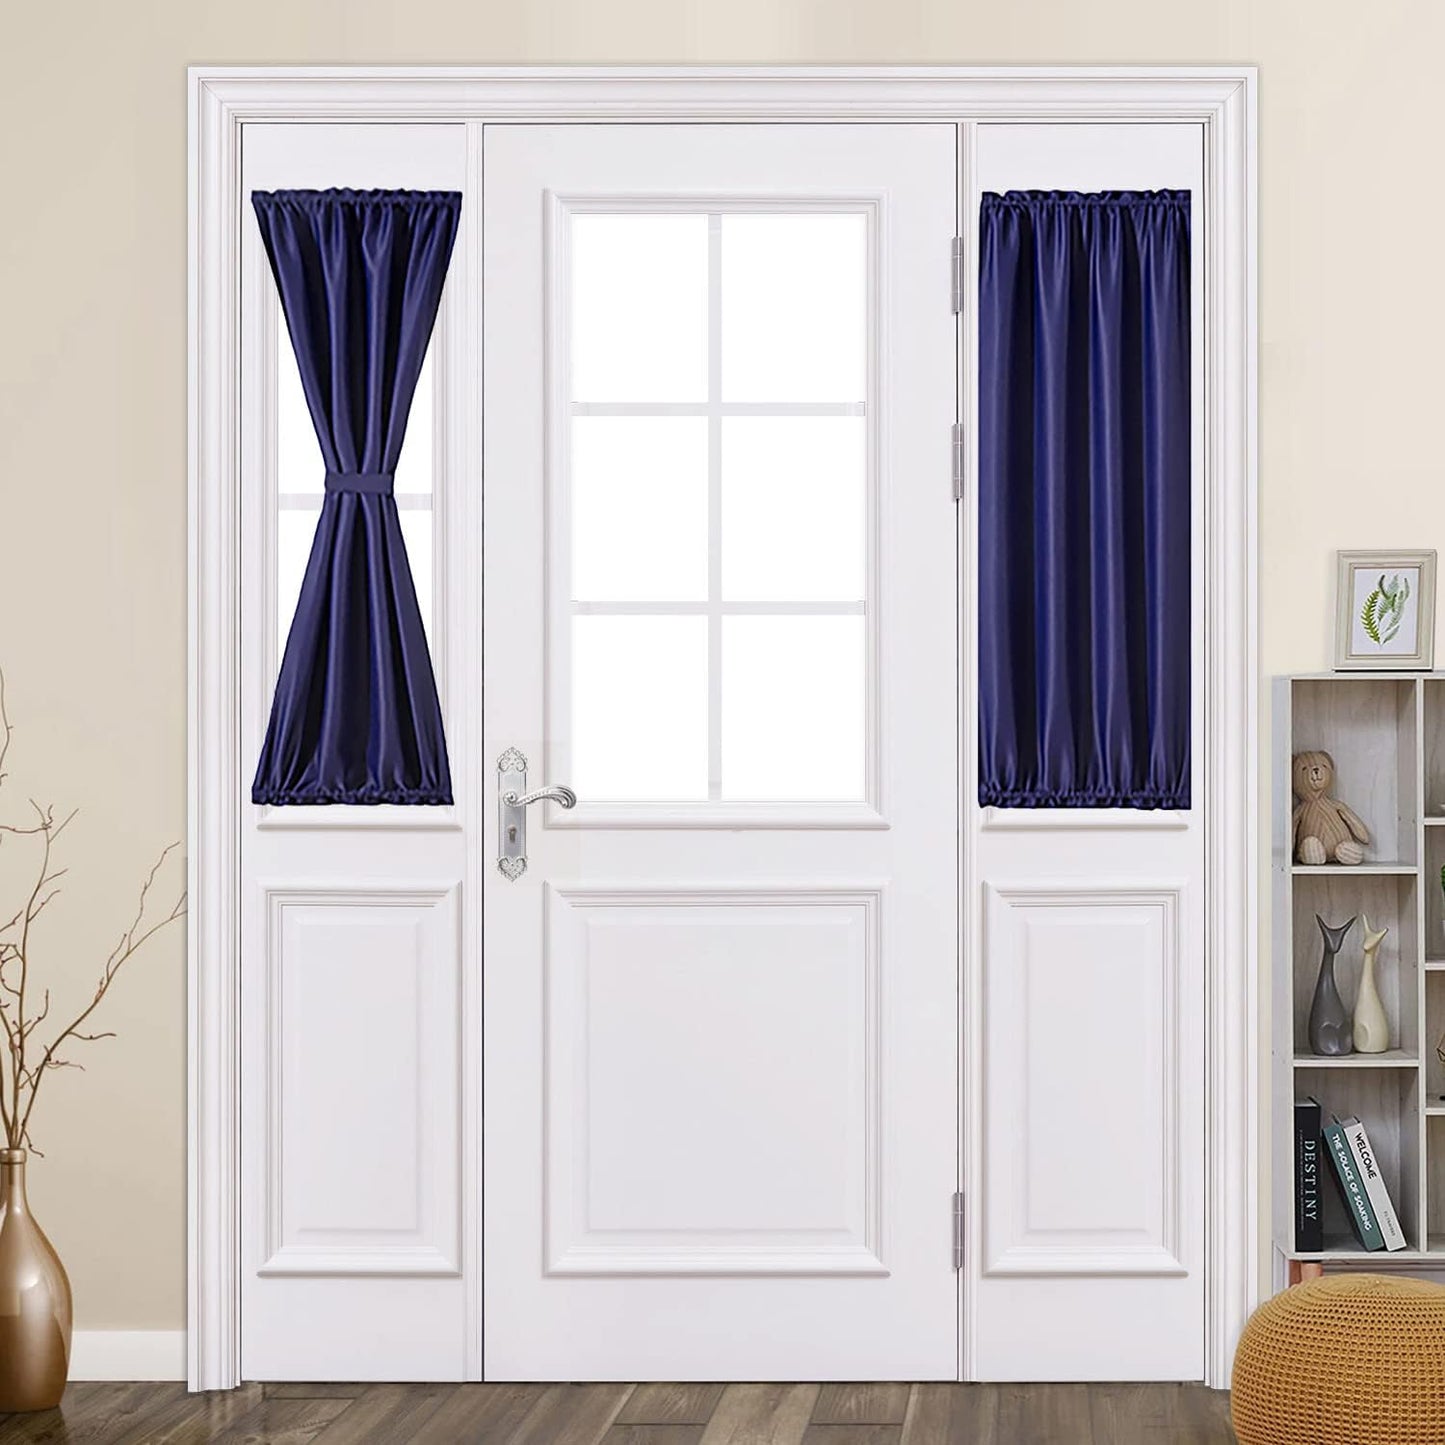 MIULEE Sidelight French Door Blackout Curtain Thermal Insulated Drapes Light Blocking Window Treatment Curtain for Narrow Glass Door Rod Pocket with Tieback 25 Inch by 72 Inch Black 1 Panel  MIULEE Navy Blue 40.00" X 25.00" 